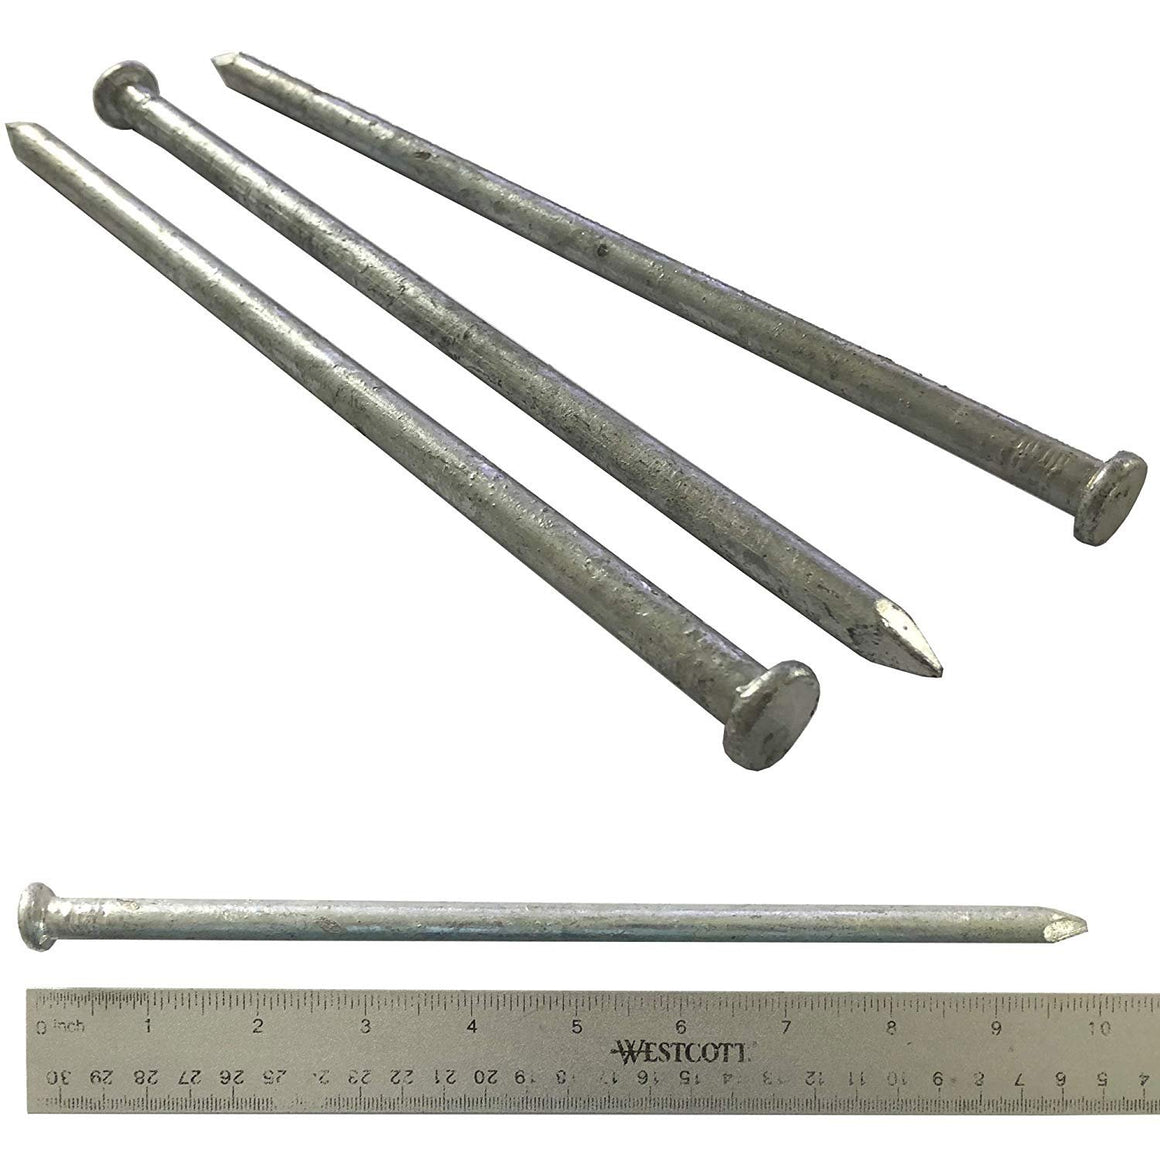 (10) 100d - Galvanized Spike nail - (10) Pack